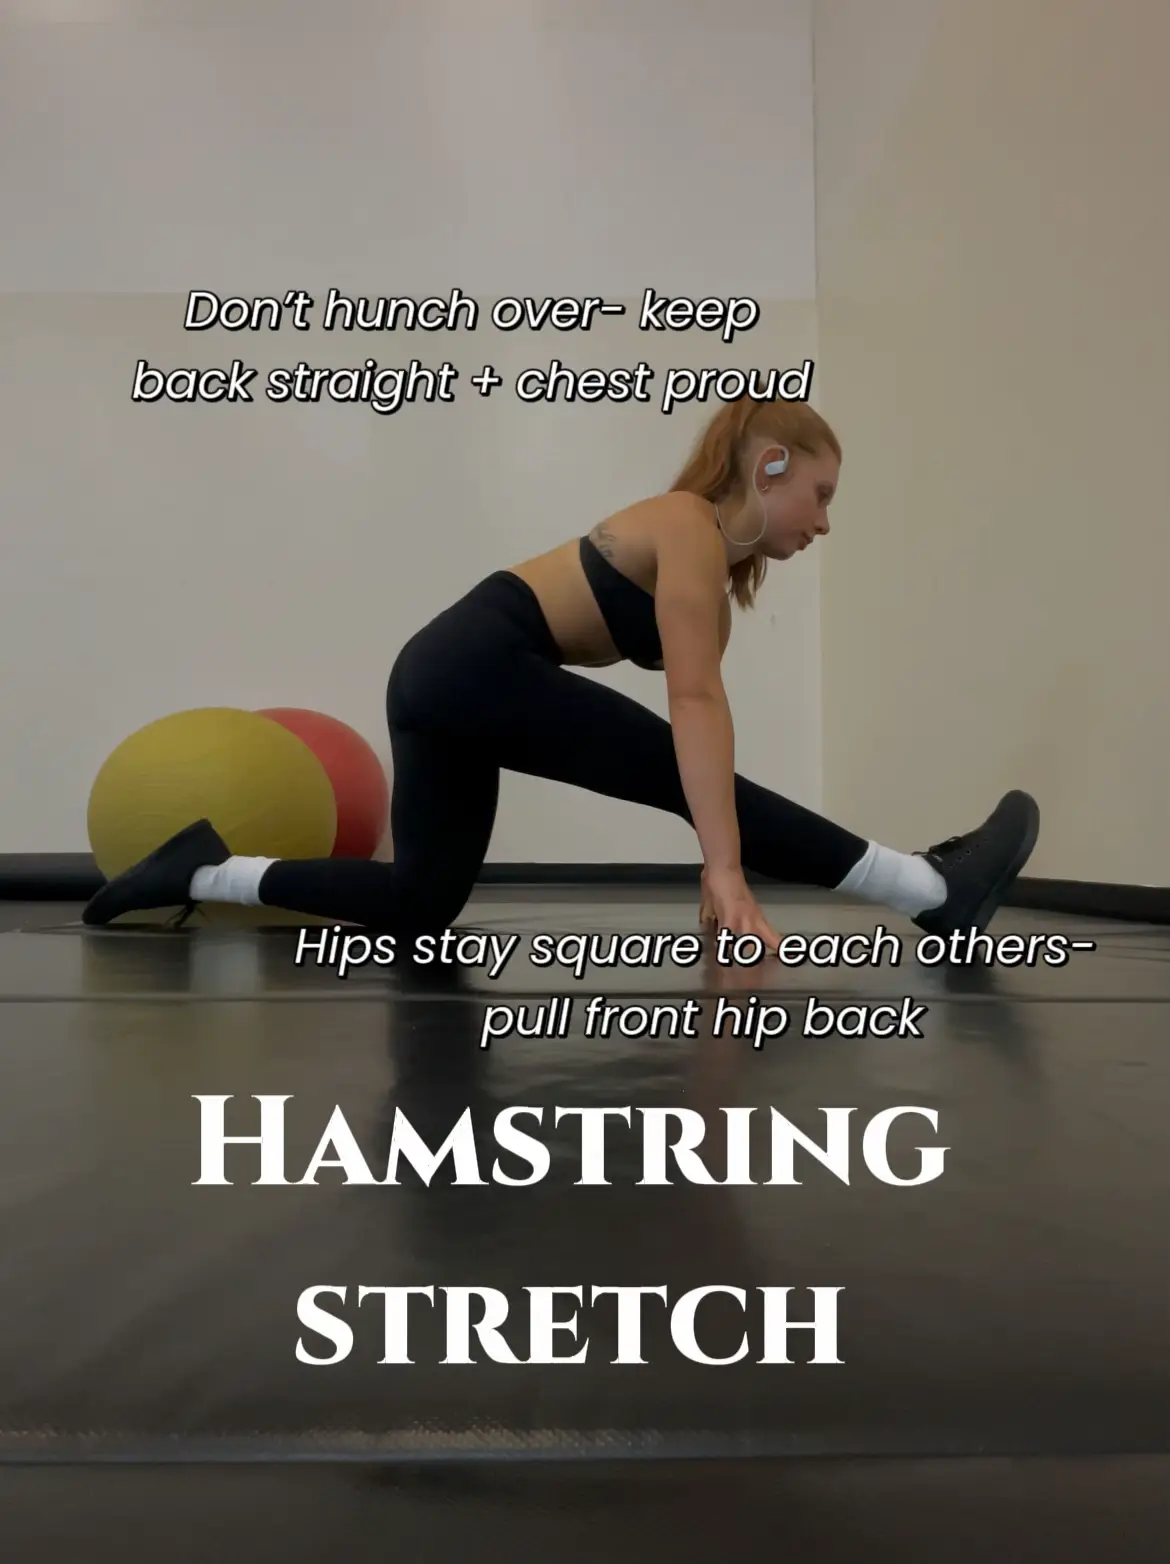  A woman is doing a hamstring stretch.